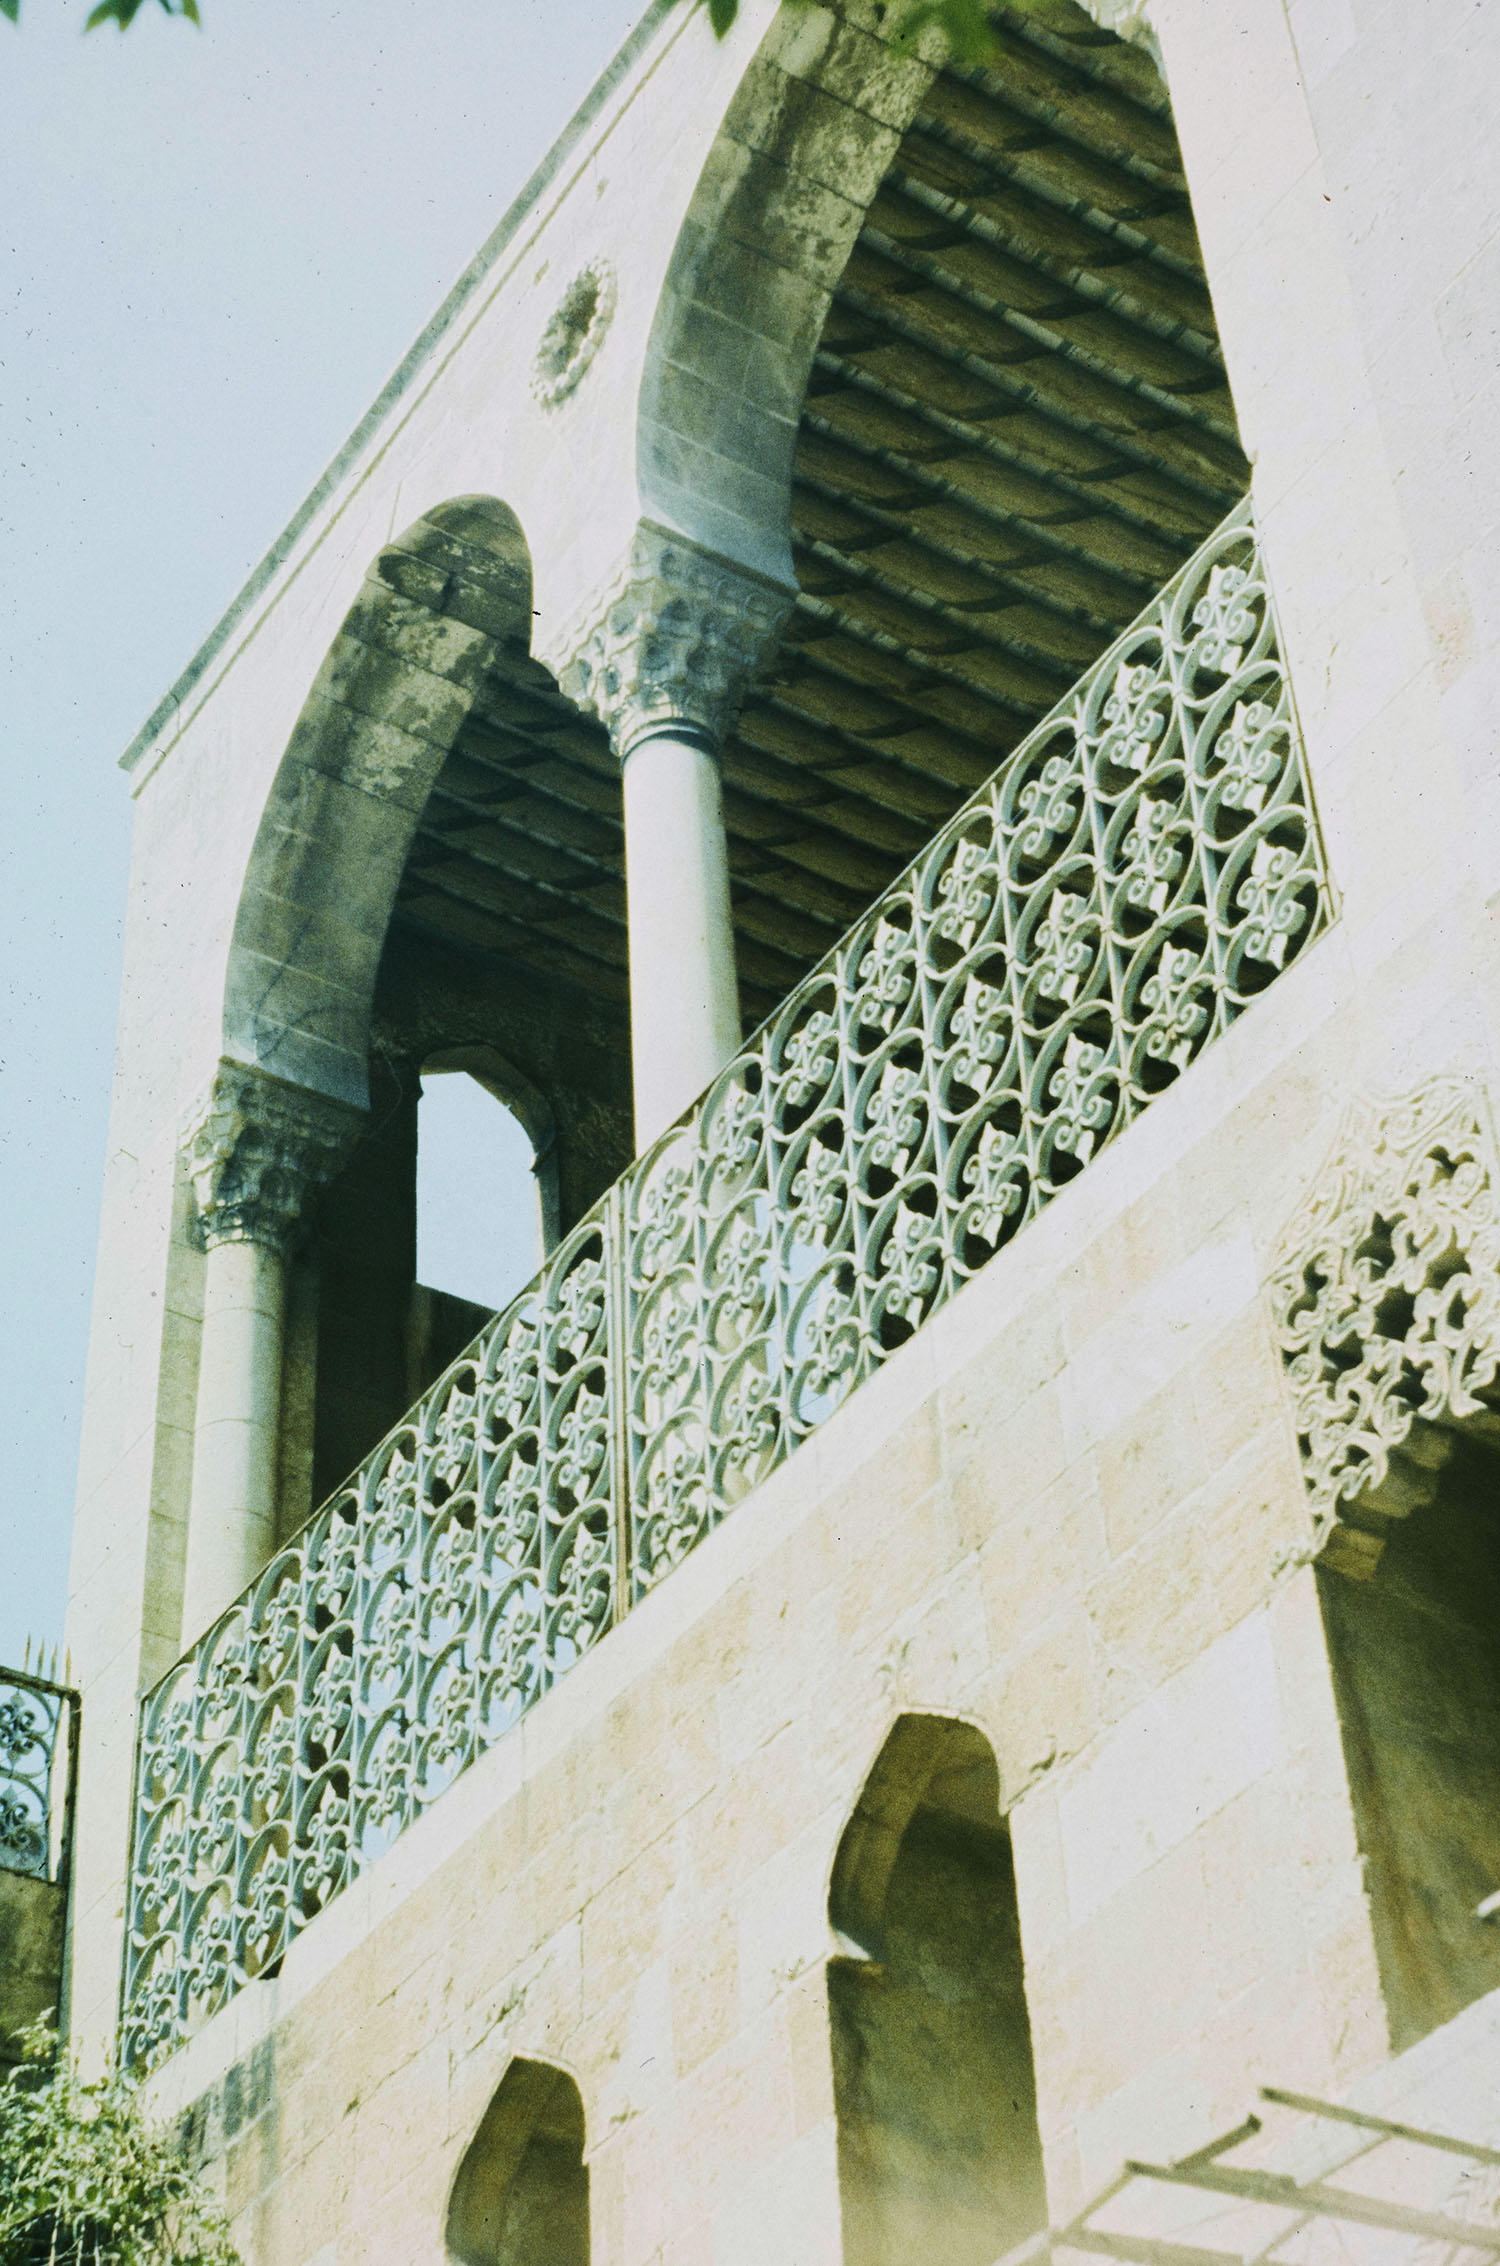 View from courtyard of harem balcony.